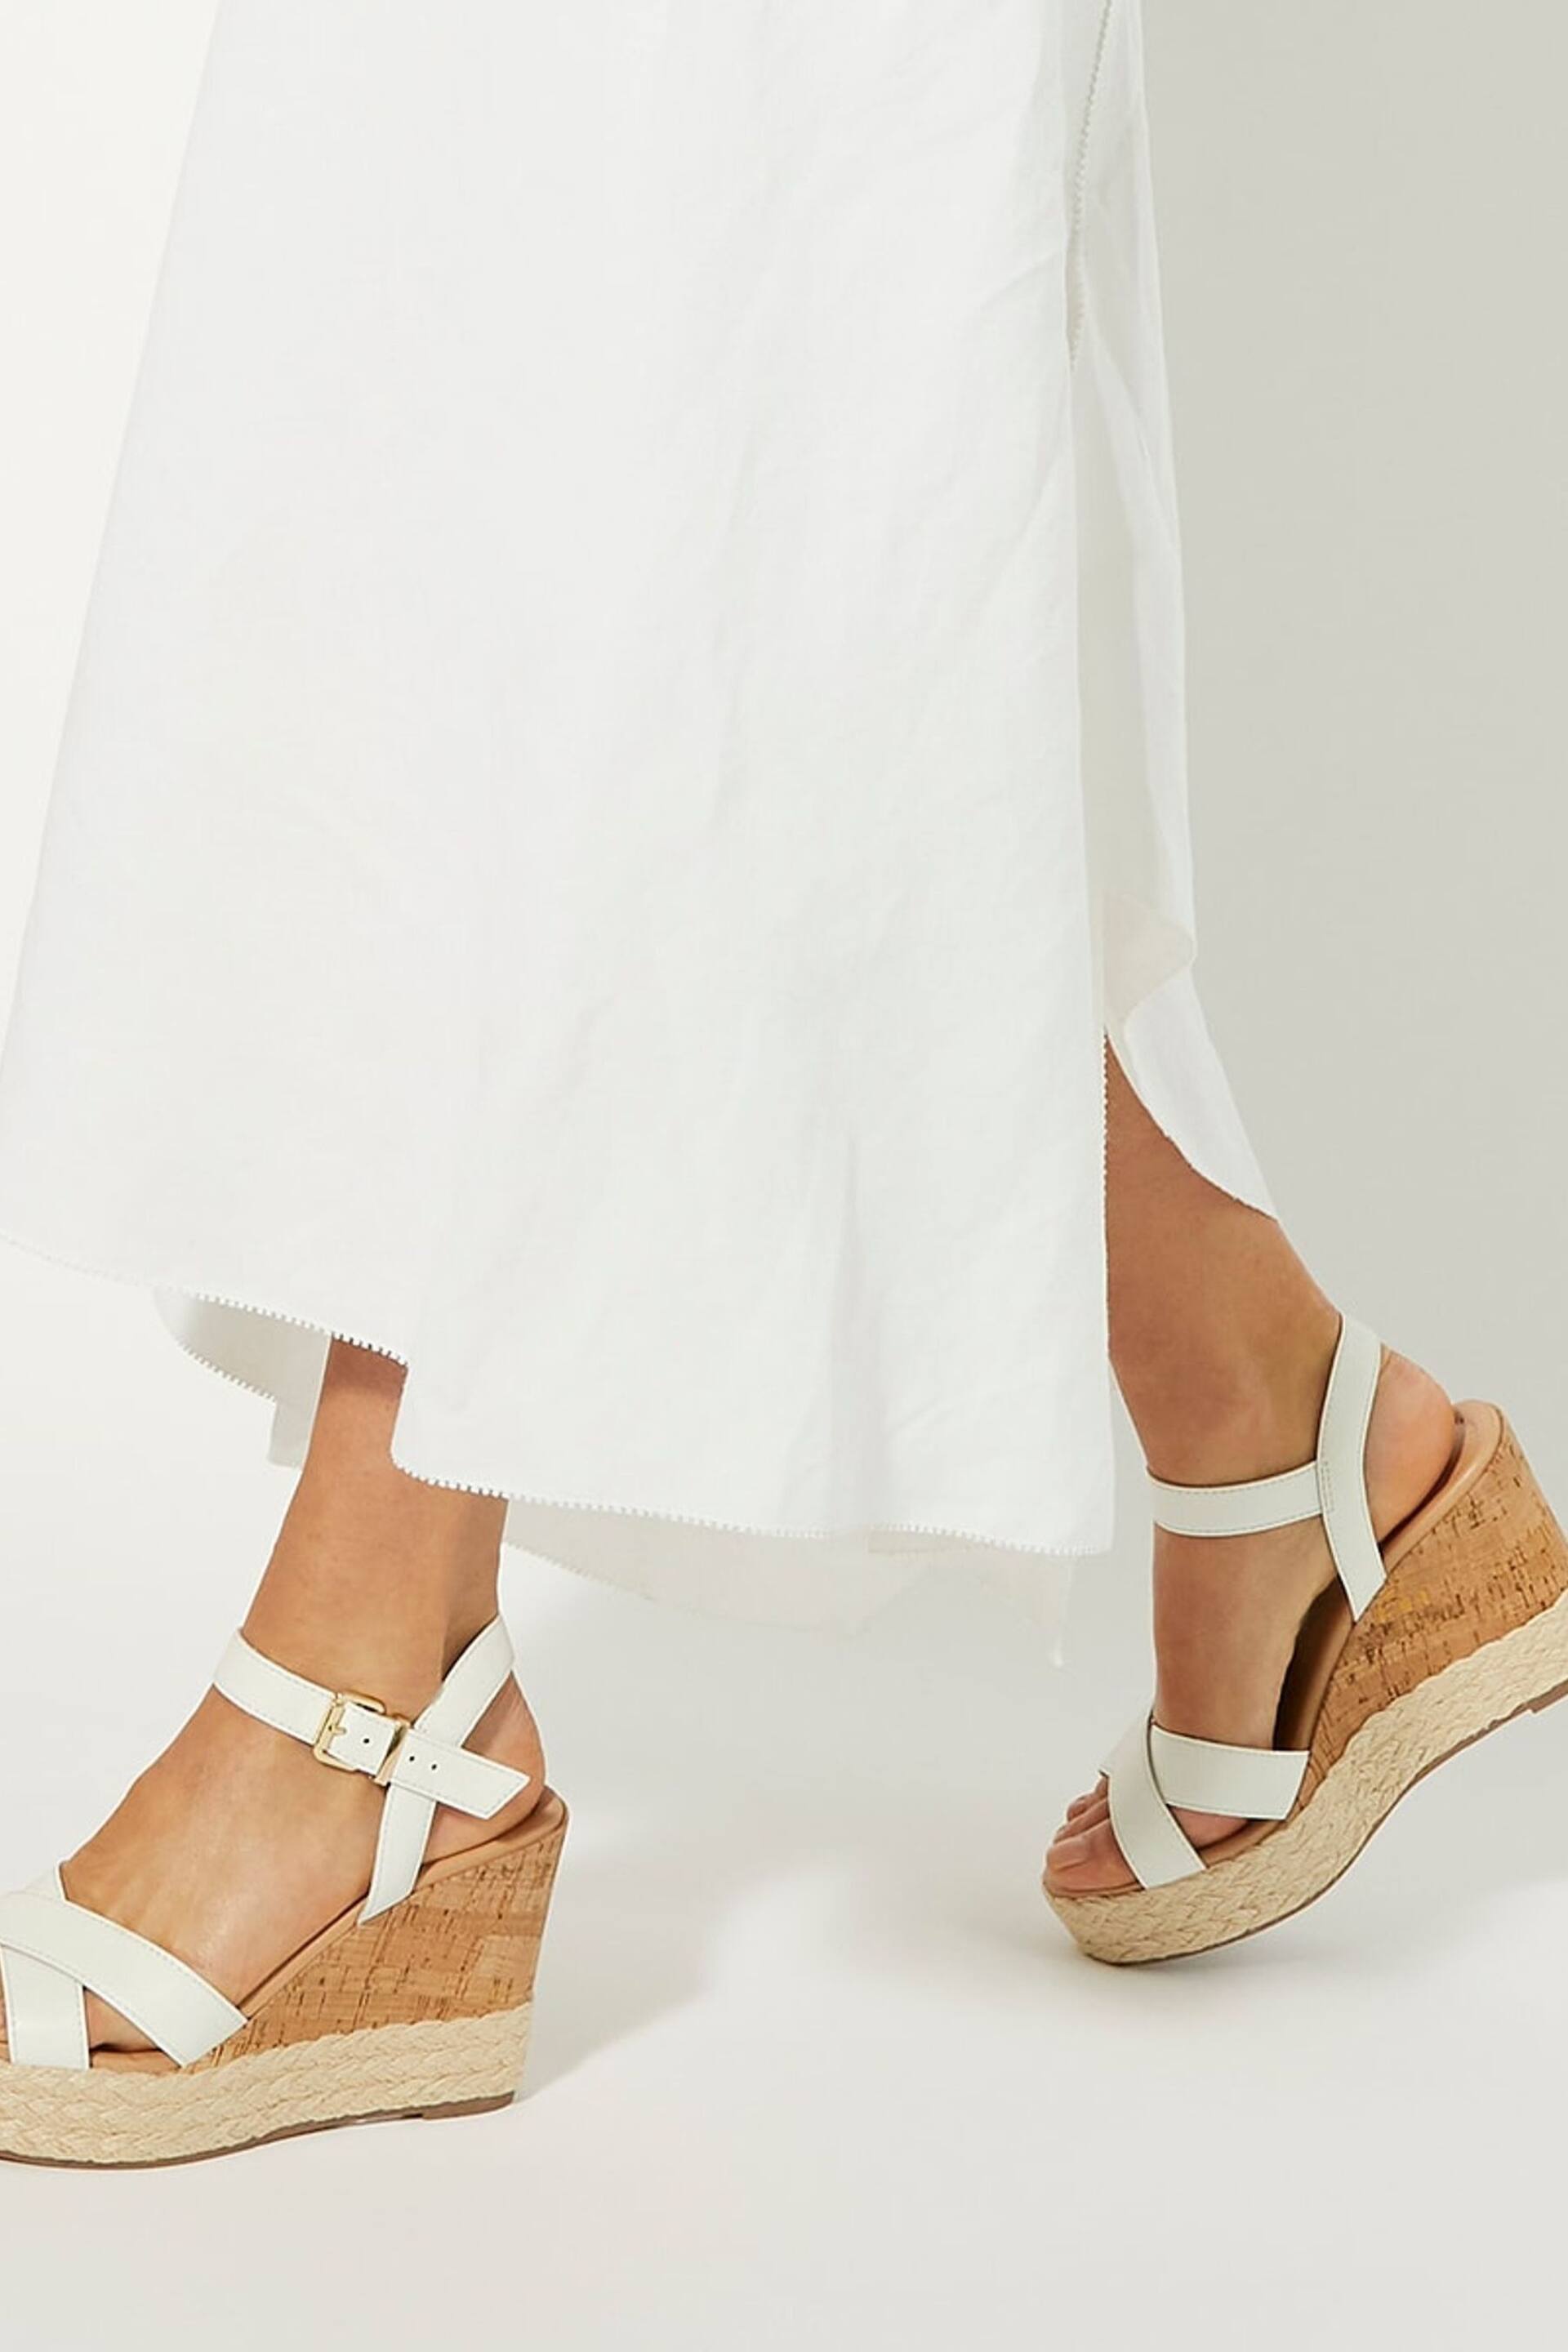 Dune London White Kindest Cross Strap Wedge Sandals - Image 1 of 6